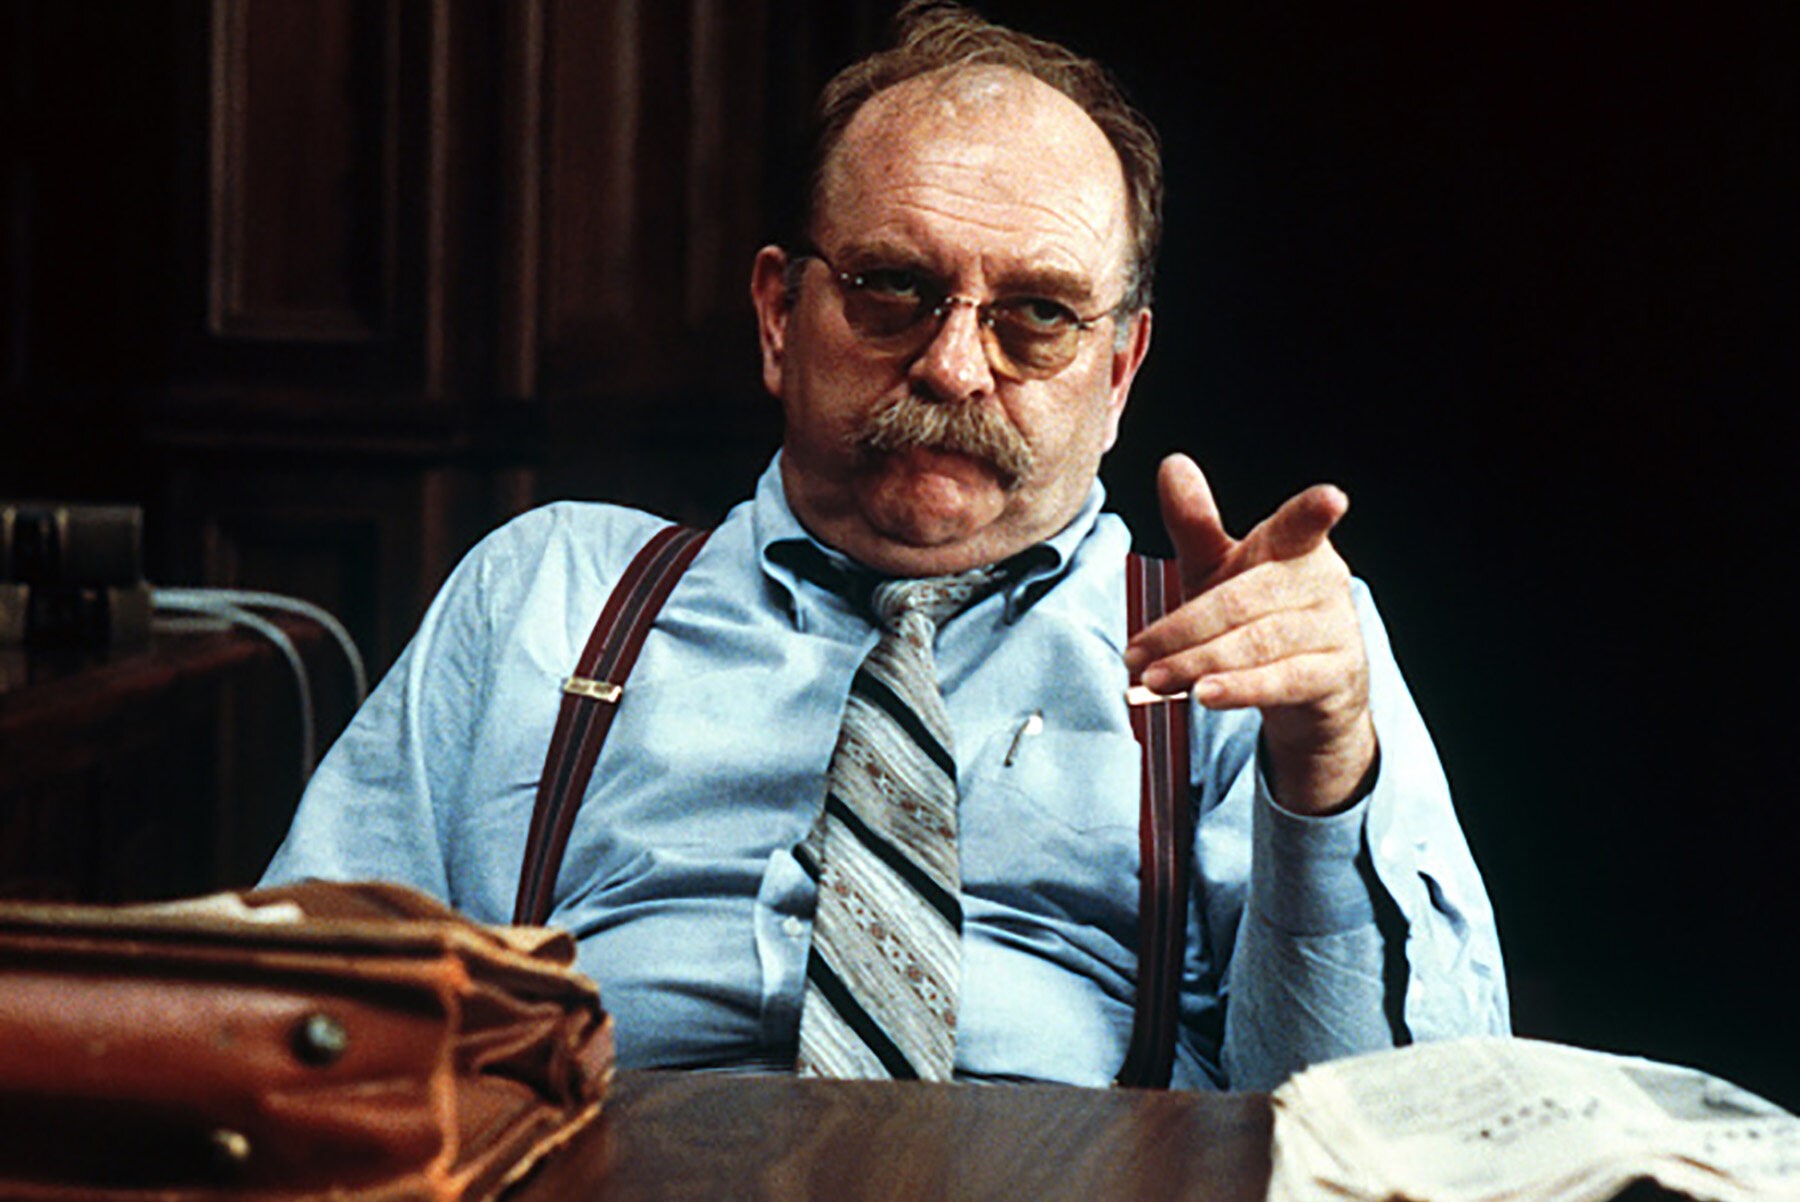 19-surprising-facts-about-wilford-brimley